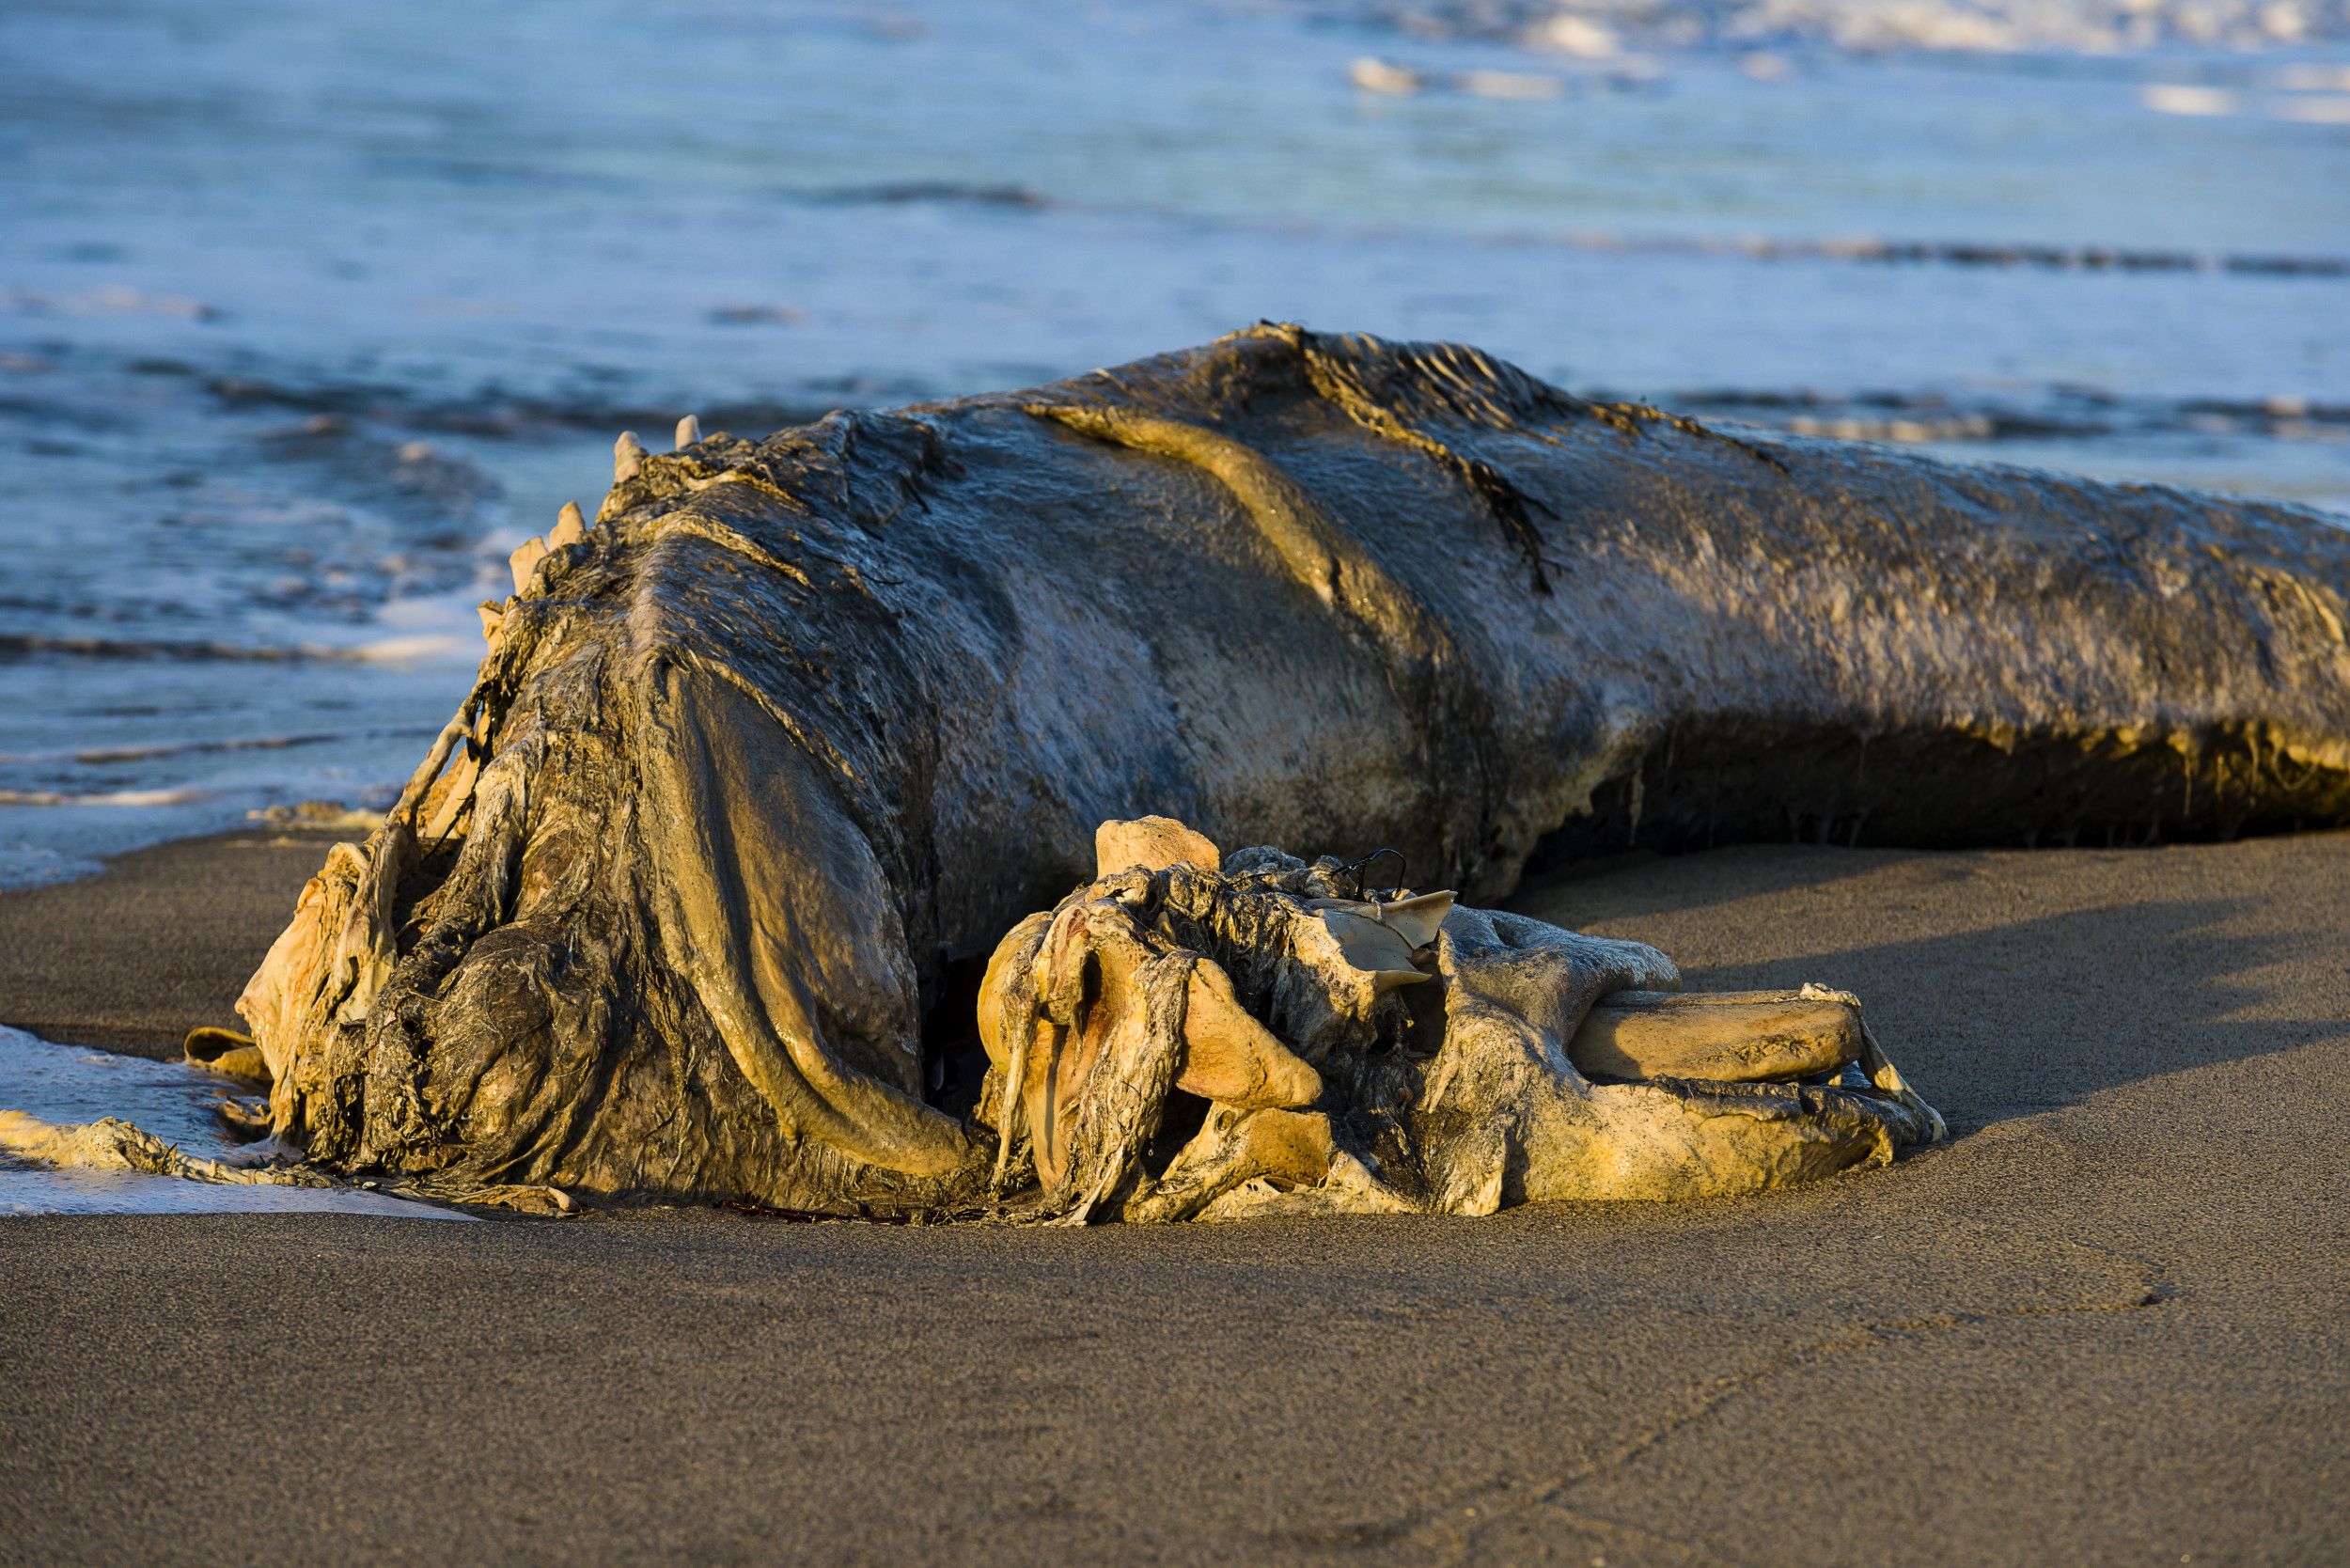 Mystery of Hairy Sea Monster That Washed Up on Oregon Beach Finally Solved